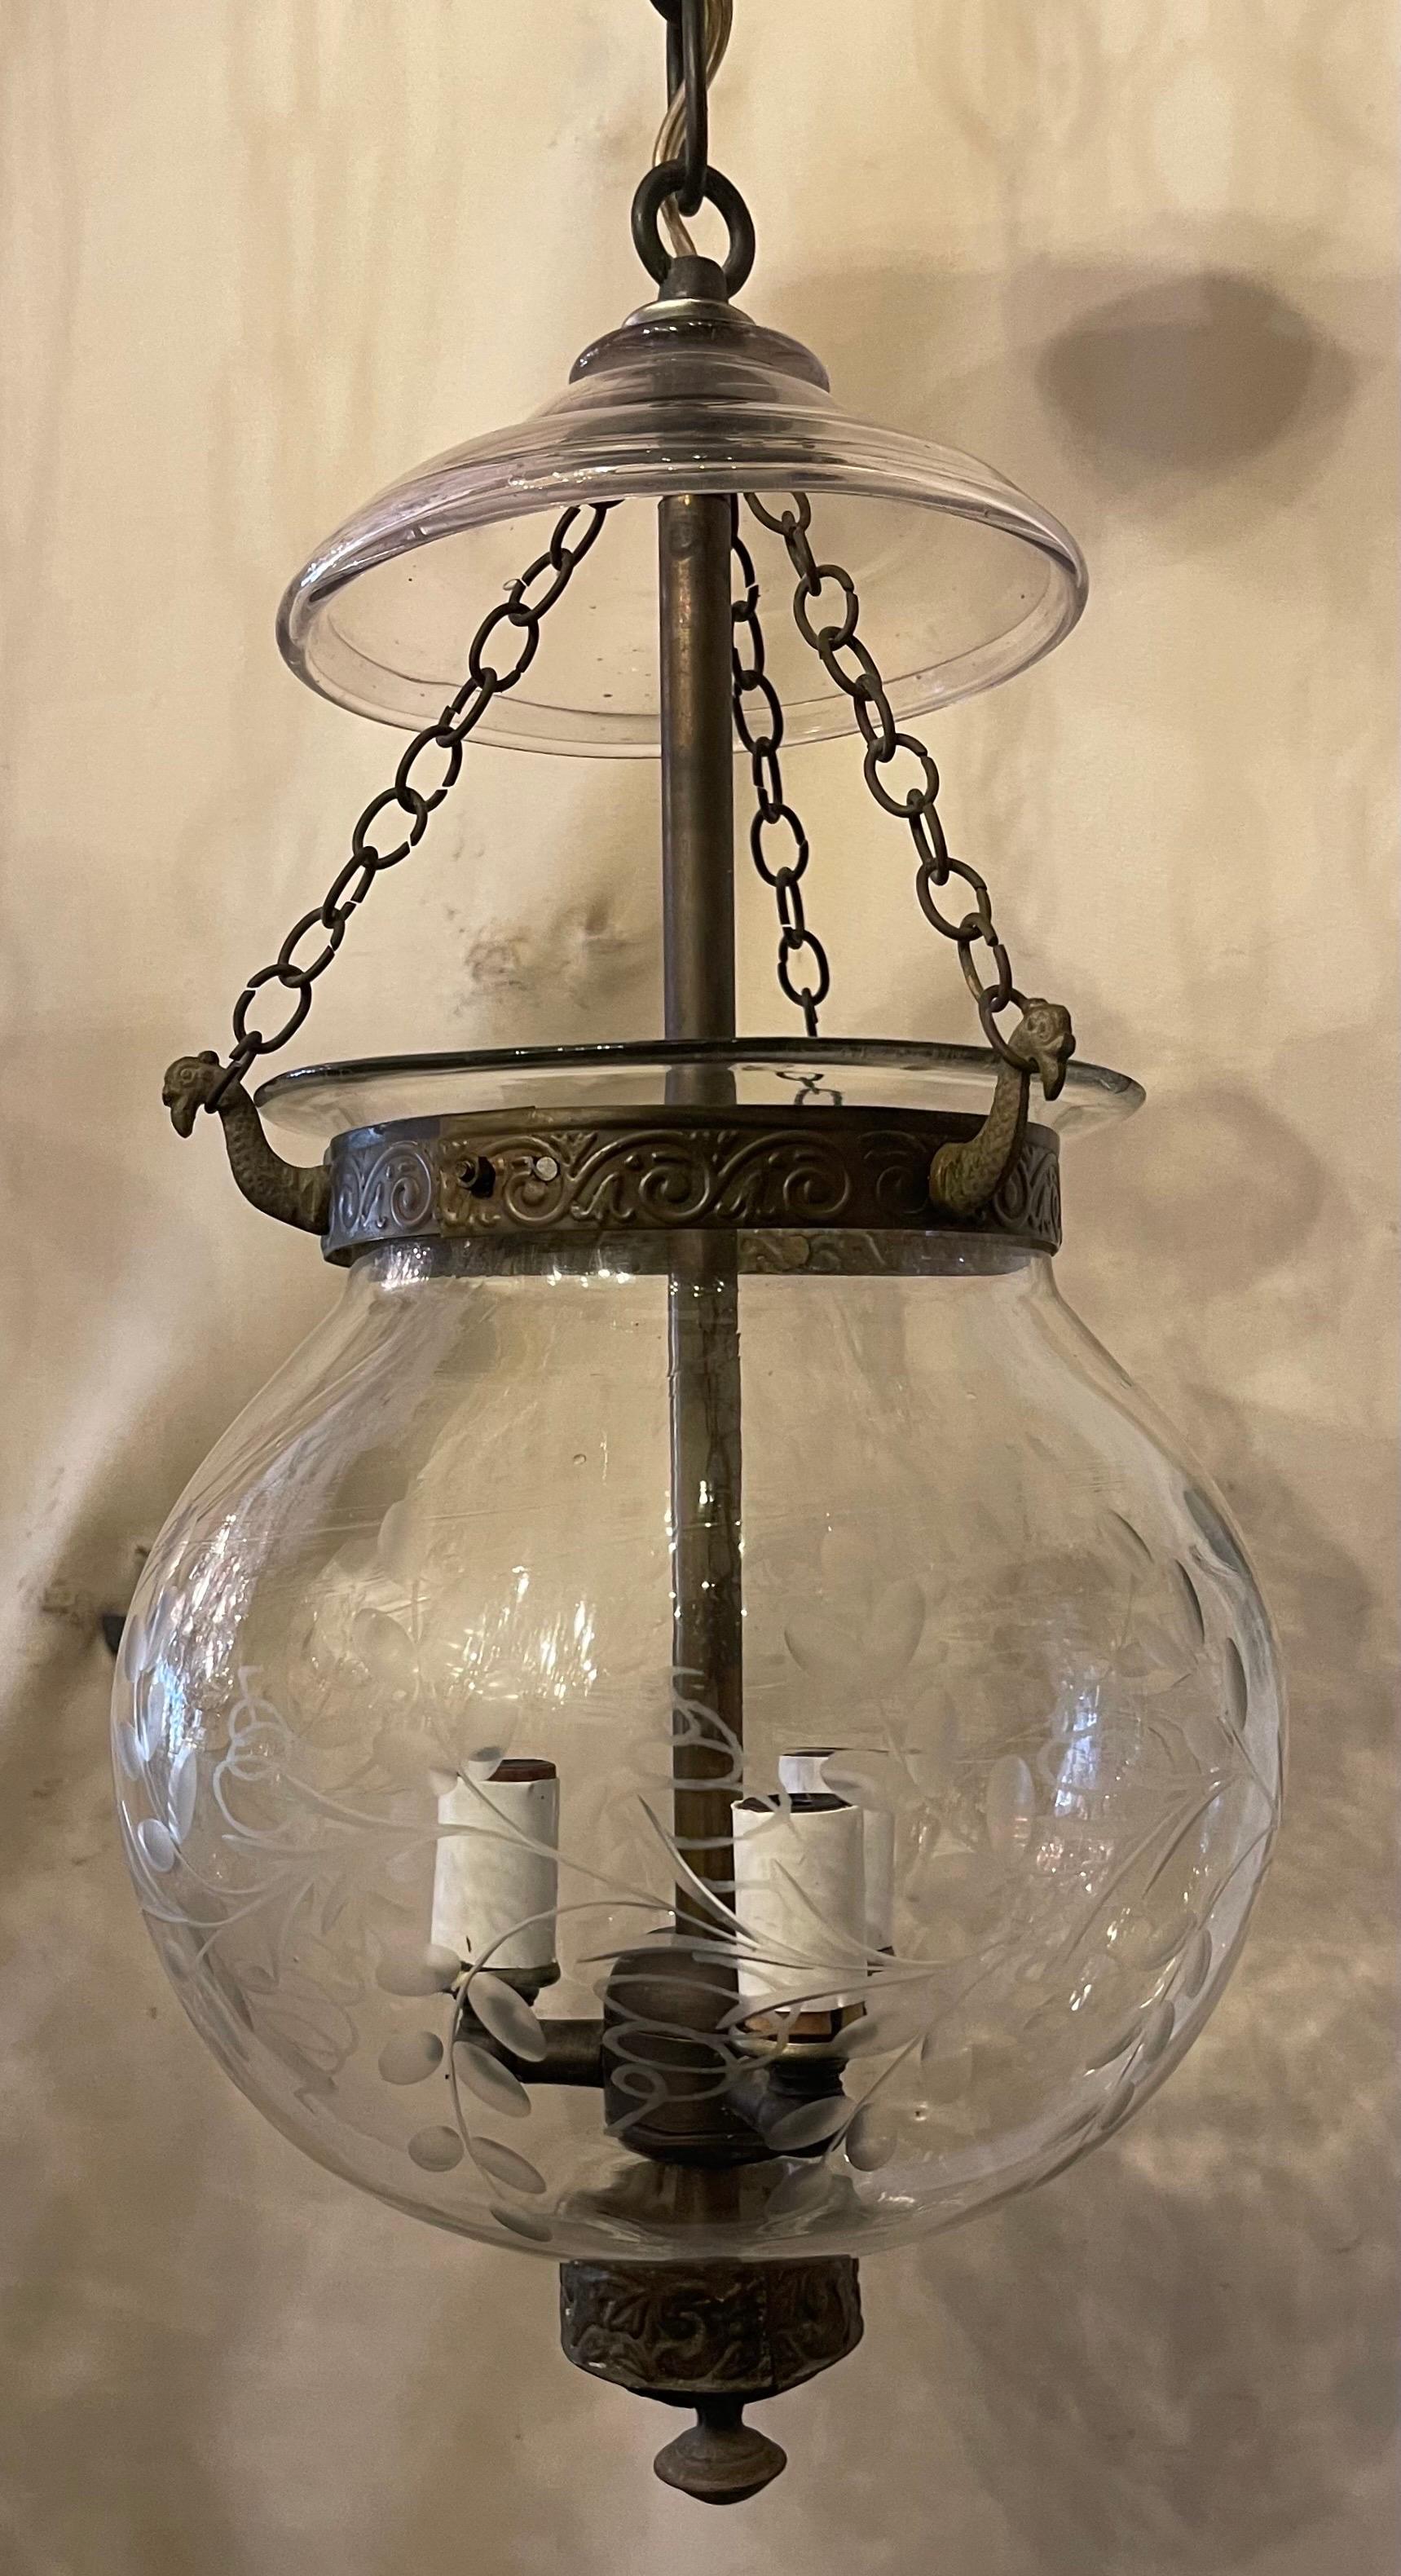 A Wonderful Vintage Pair Of Etched Glass Leaves Grape Vine Pattern Bell Jar Lanterns With Oxidized Brass Hardware, In The Manner Of Vaughan These Fixture Have 3 Candelabra Internal Lights And Comes Ready To Install With Chain Canopy And Mounting